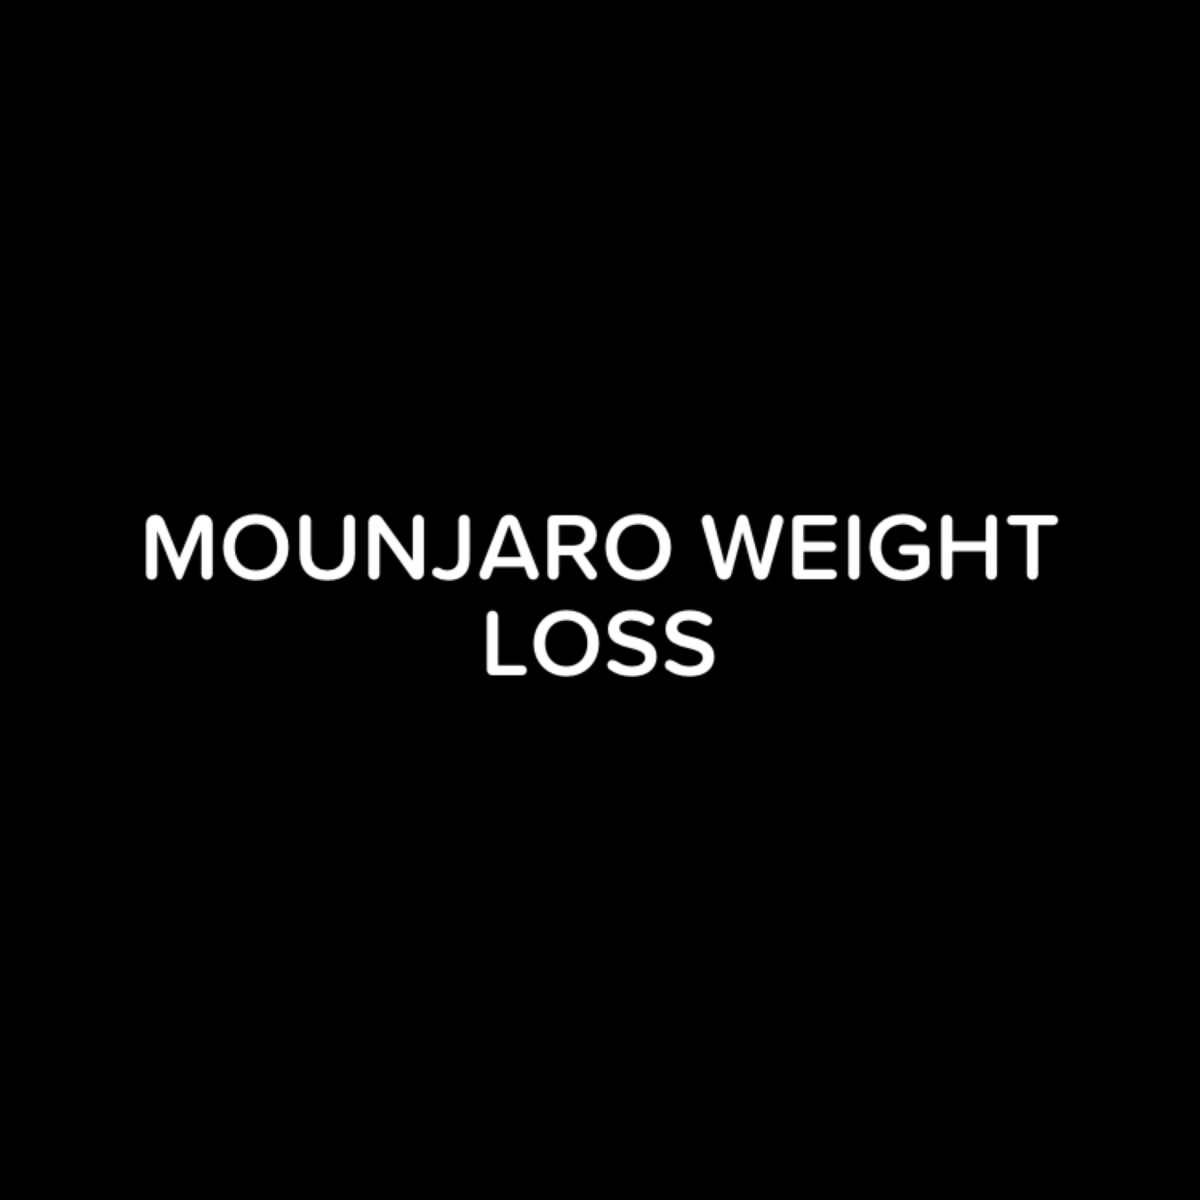 You are currently viewing The Revolutionary Mounjaro Weight Loss Reviews: How to Safely and Effectively Lose Weight on Mounjaro